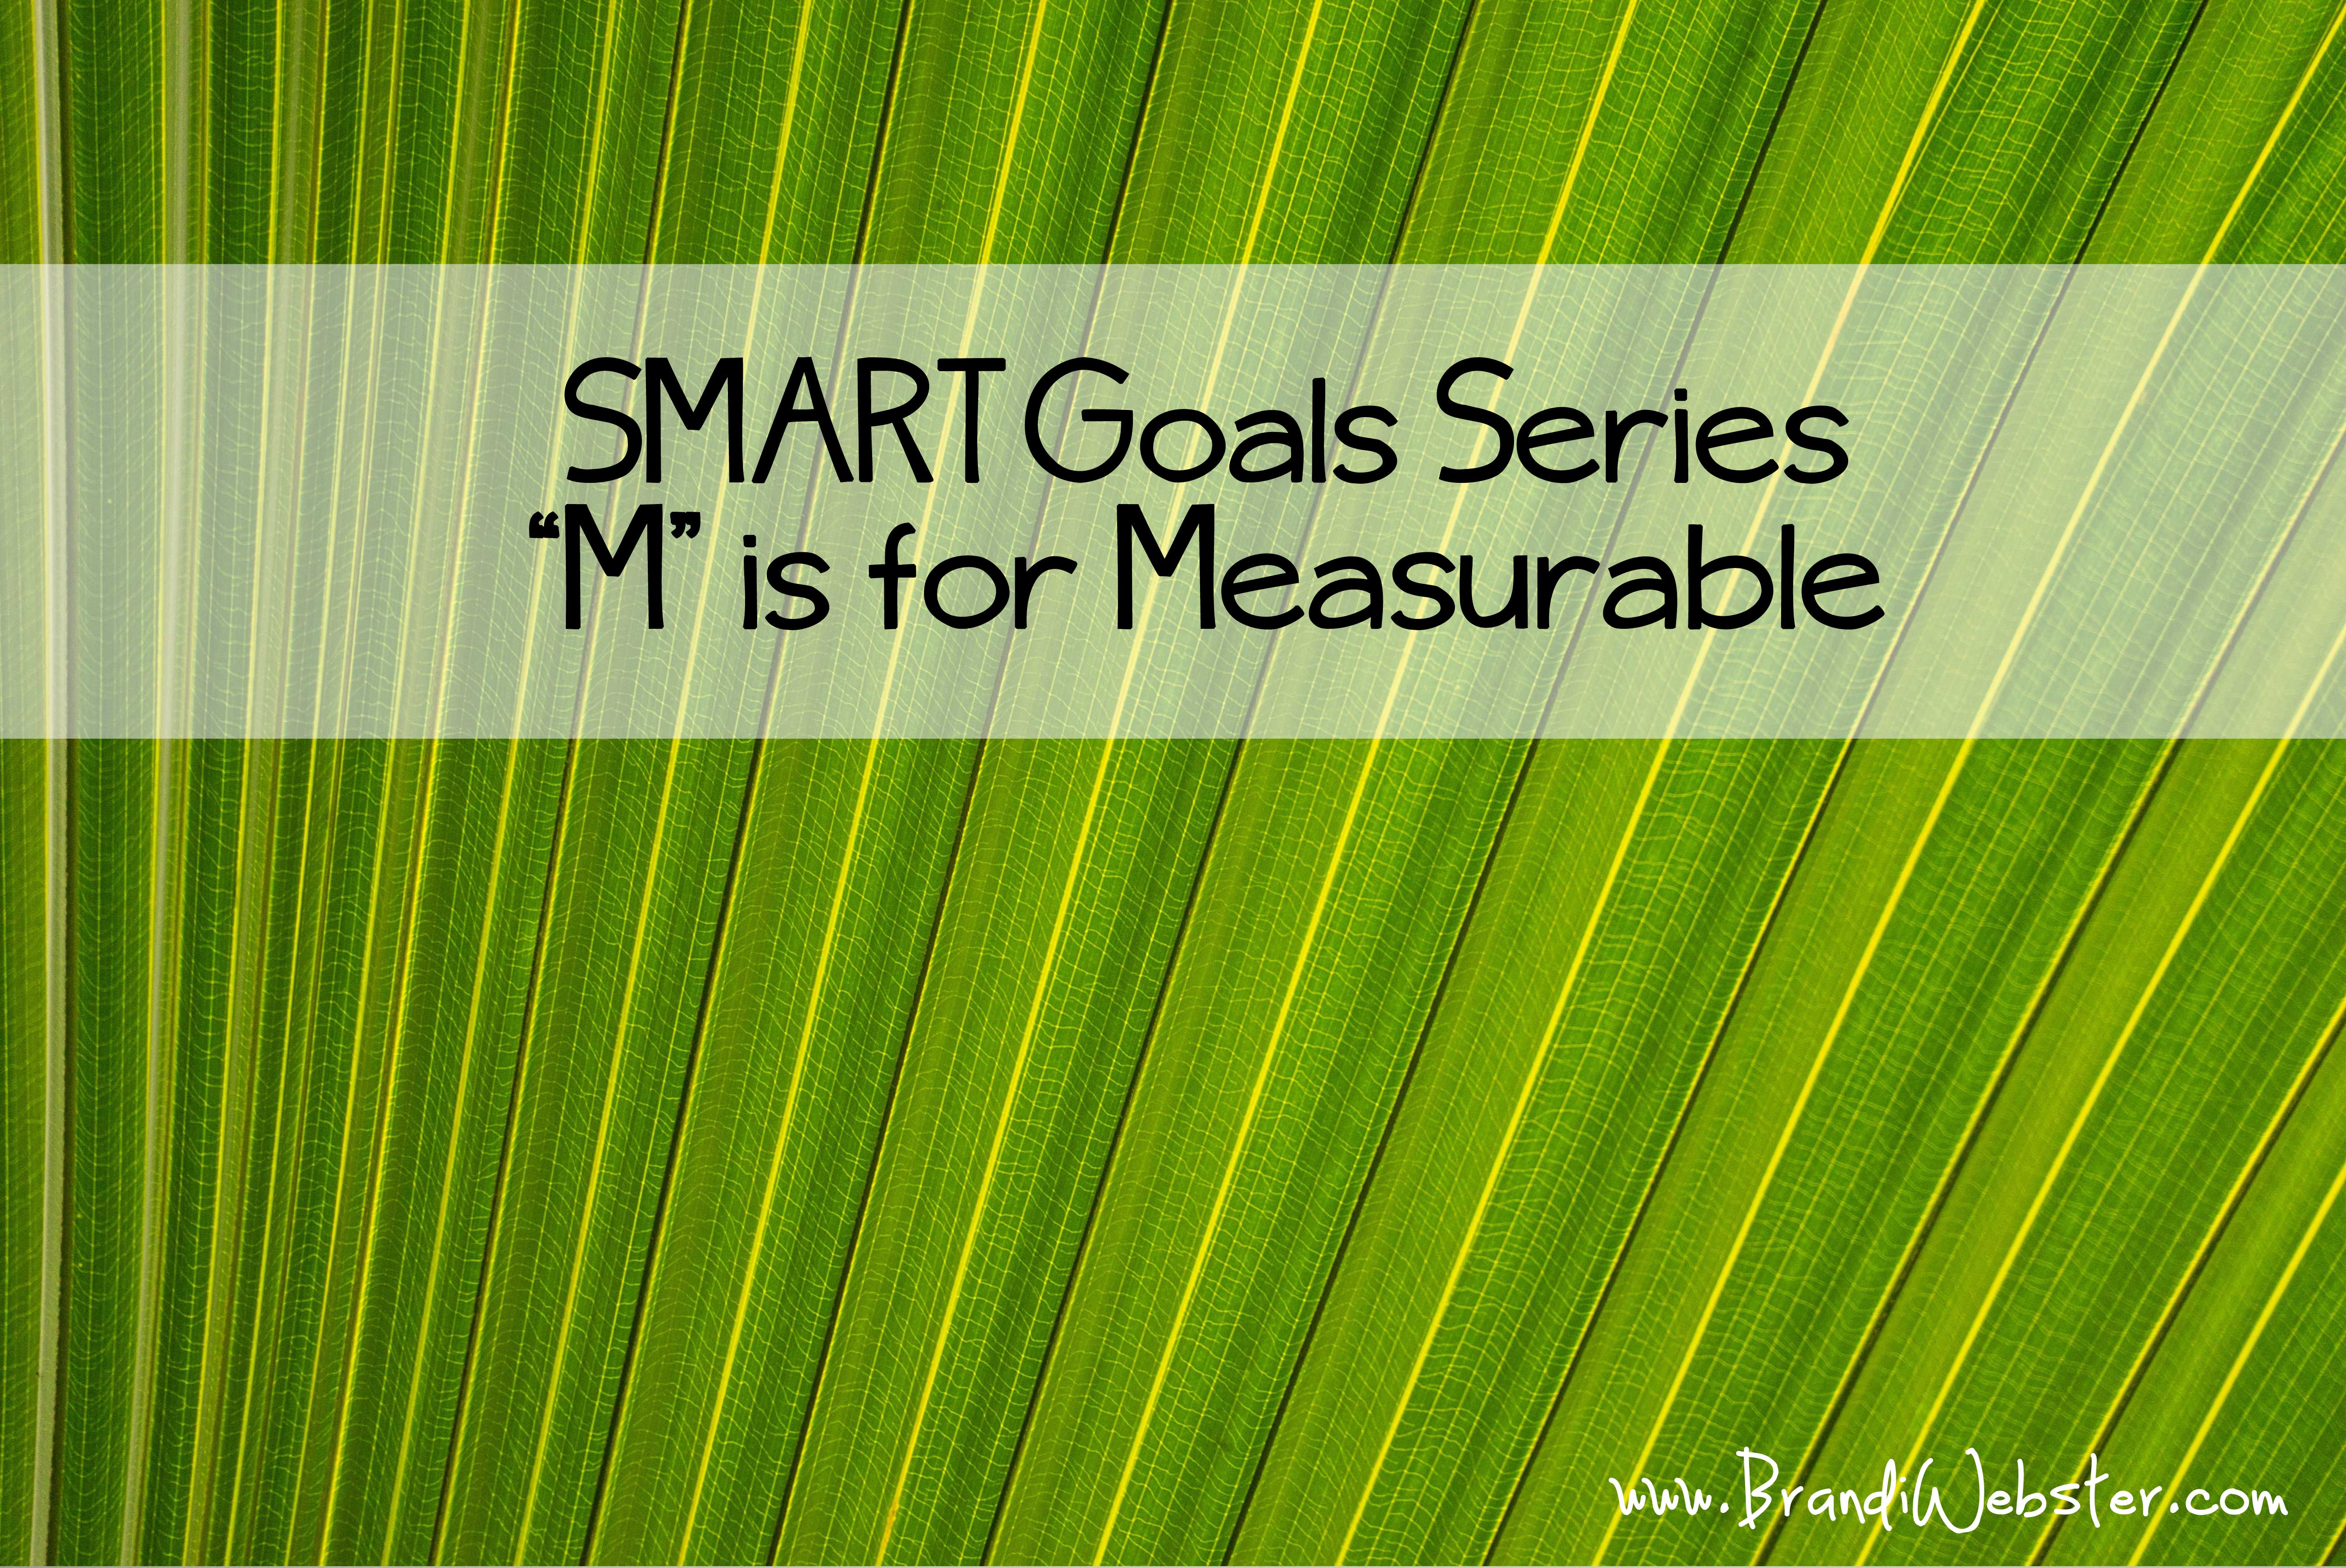 SMART Goals- "M" is for Measurable